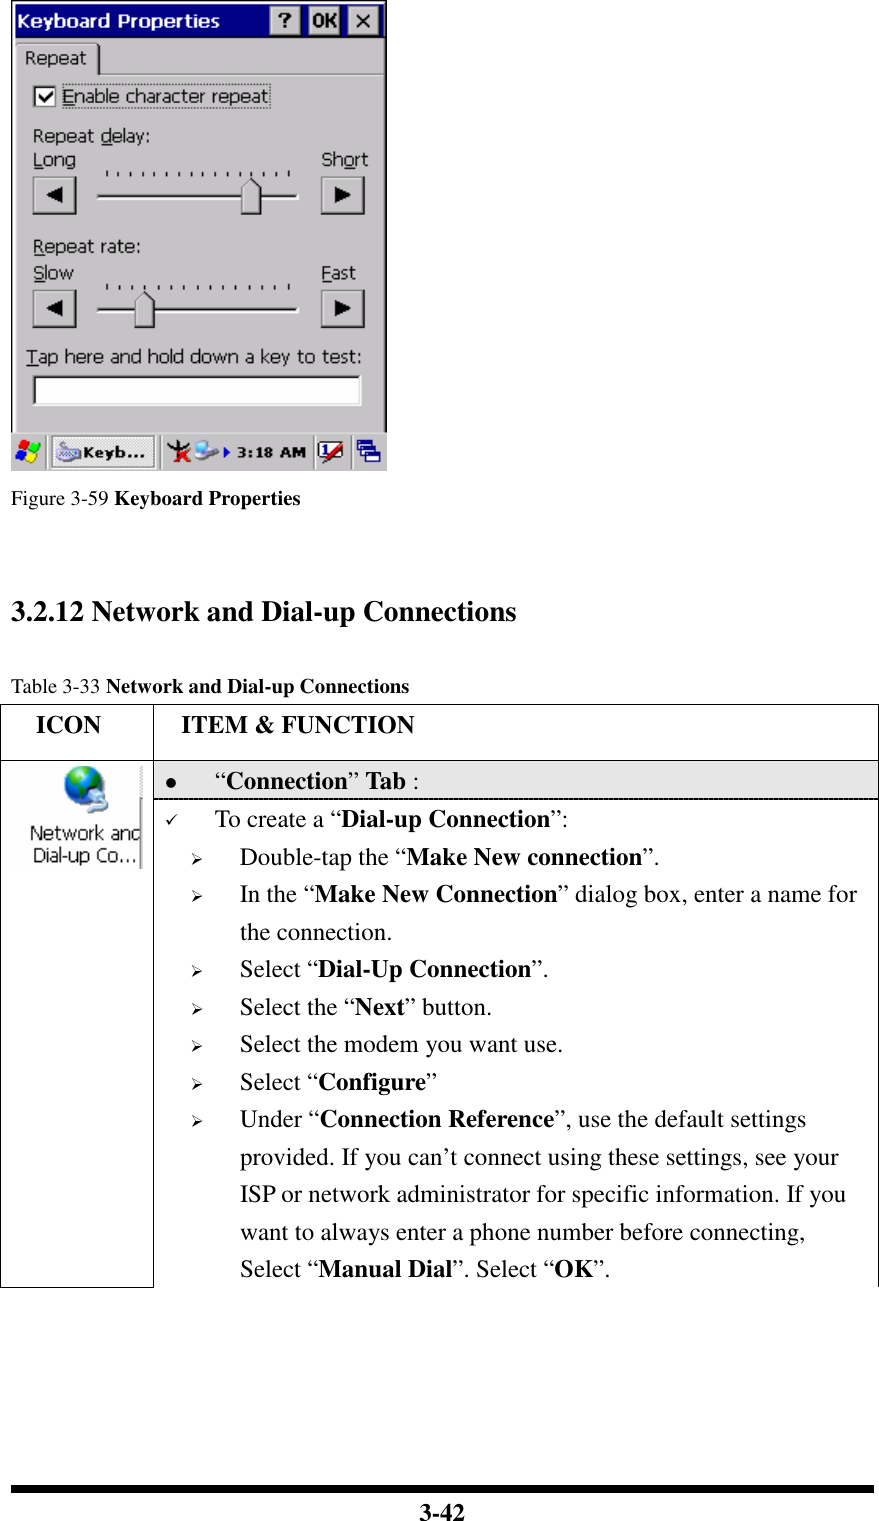  3-42  Figure 3-59 Keyboard Properties   3.2.12 Network and Dial-up Connections  Table 3-33 Network and Dial-up Connections     ICON  ITEM &amp; FUNCTION  “Connection” Tab :    To create a “Dial-up Connection”:  Double-tap the “Make New connection”.  In the “Make New Connection” dialog box, enter a name for the connection.  Select “Dial-Up Connection”.  Select the “Next” button.  Select the modem you want use.  Select “Configure”  Under “Connection Reference”, use the default settings provided. If you can’t connect using these settings, see your ISP or network administrator for specific information. If you want to always enter a phone number before connecting, Select “Manual Dial”. Select “OK”. 